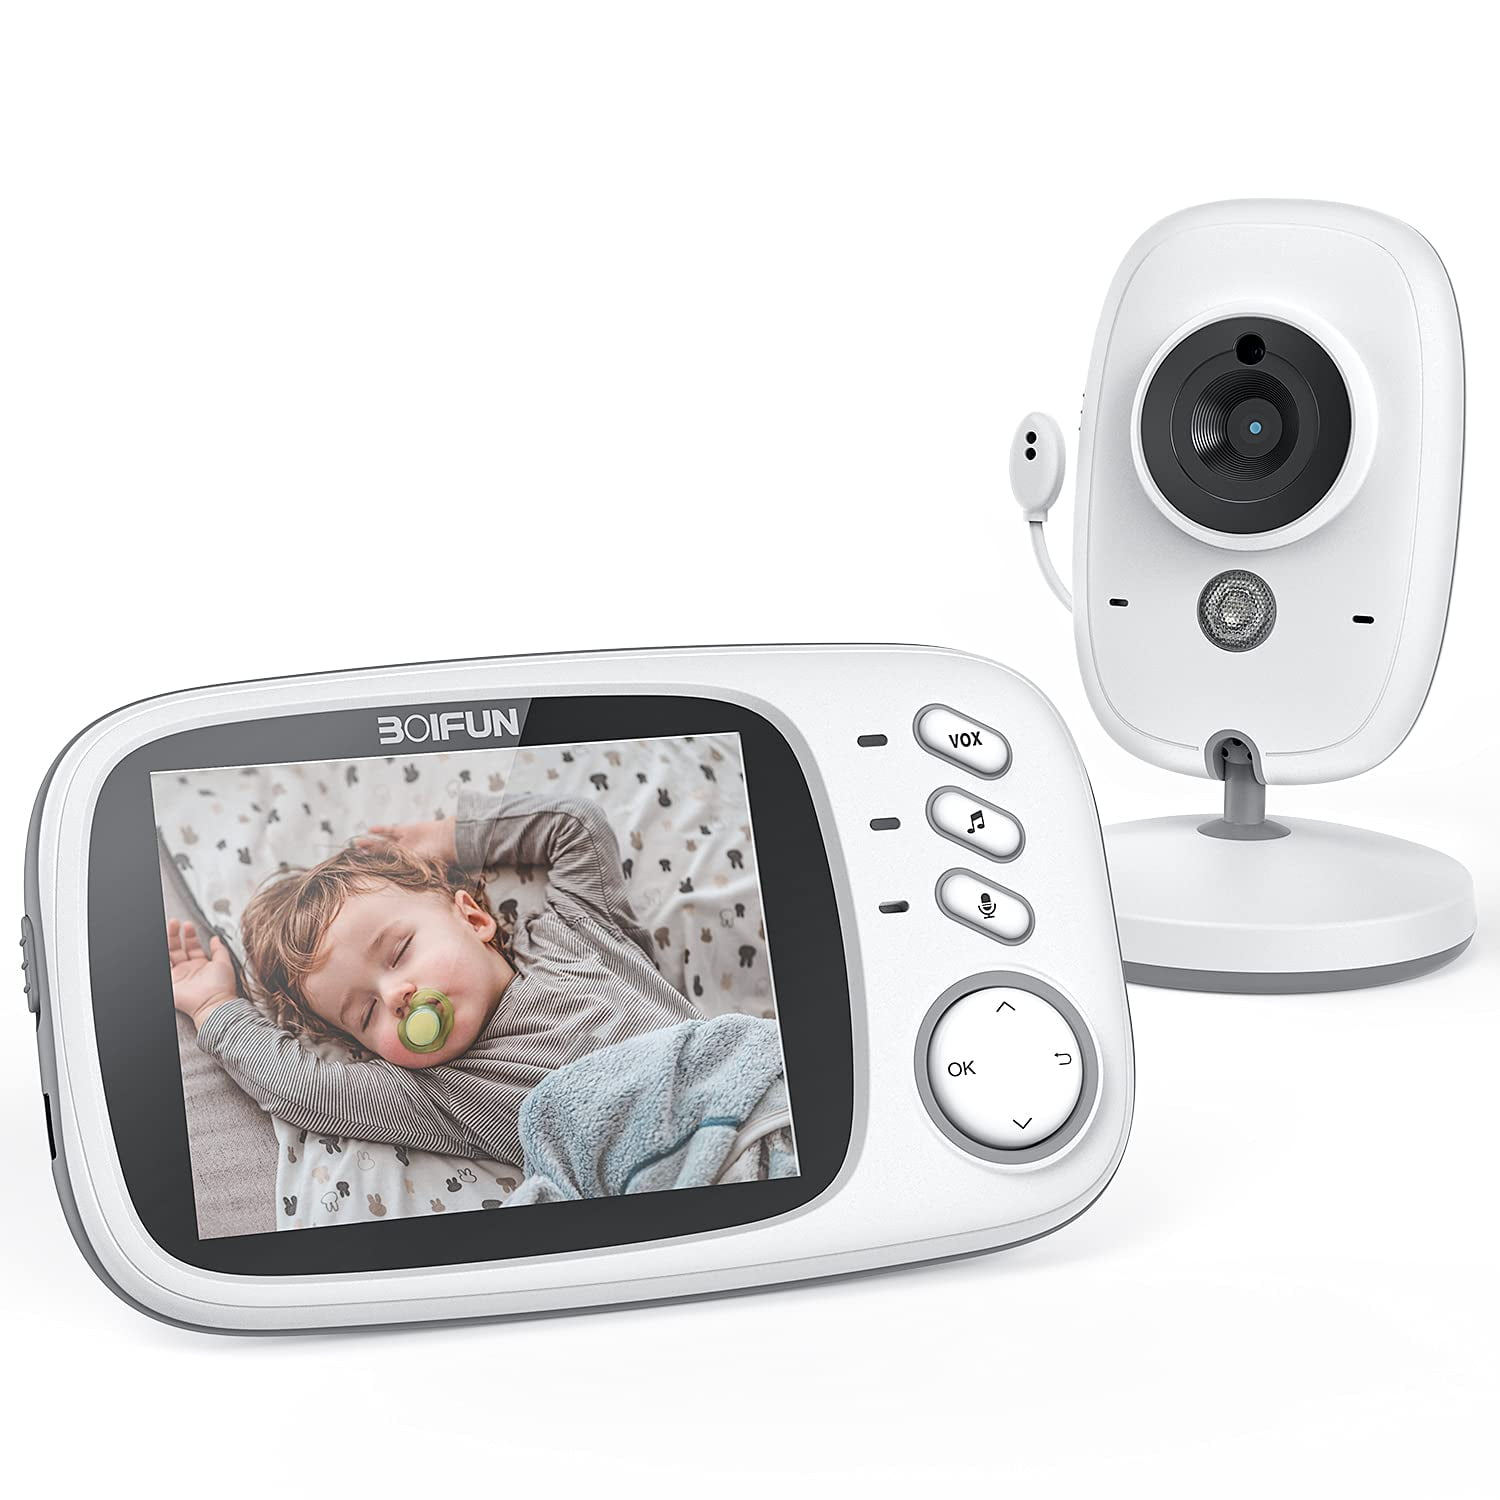 Boifun Baby Monitor With Camera And Audio No Wifi Vox Mode Night